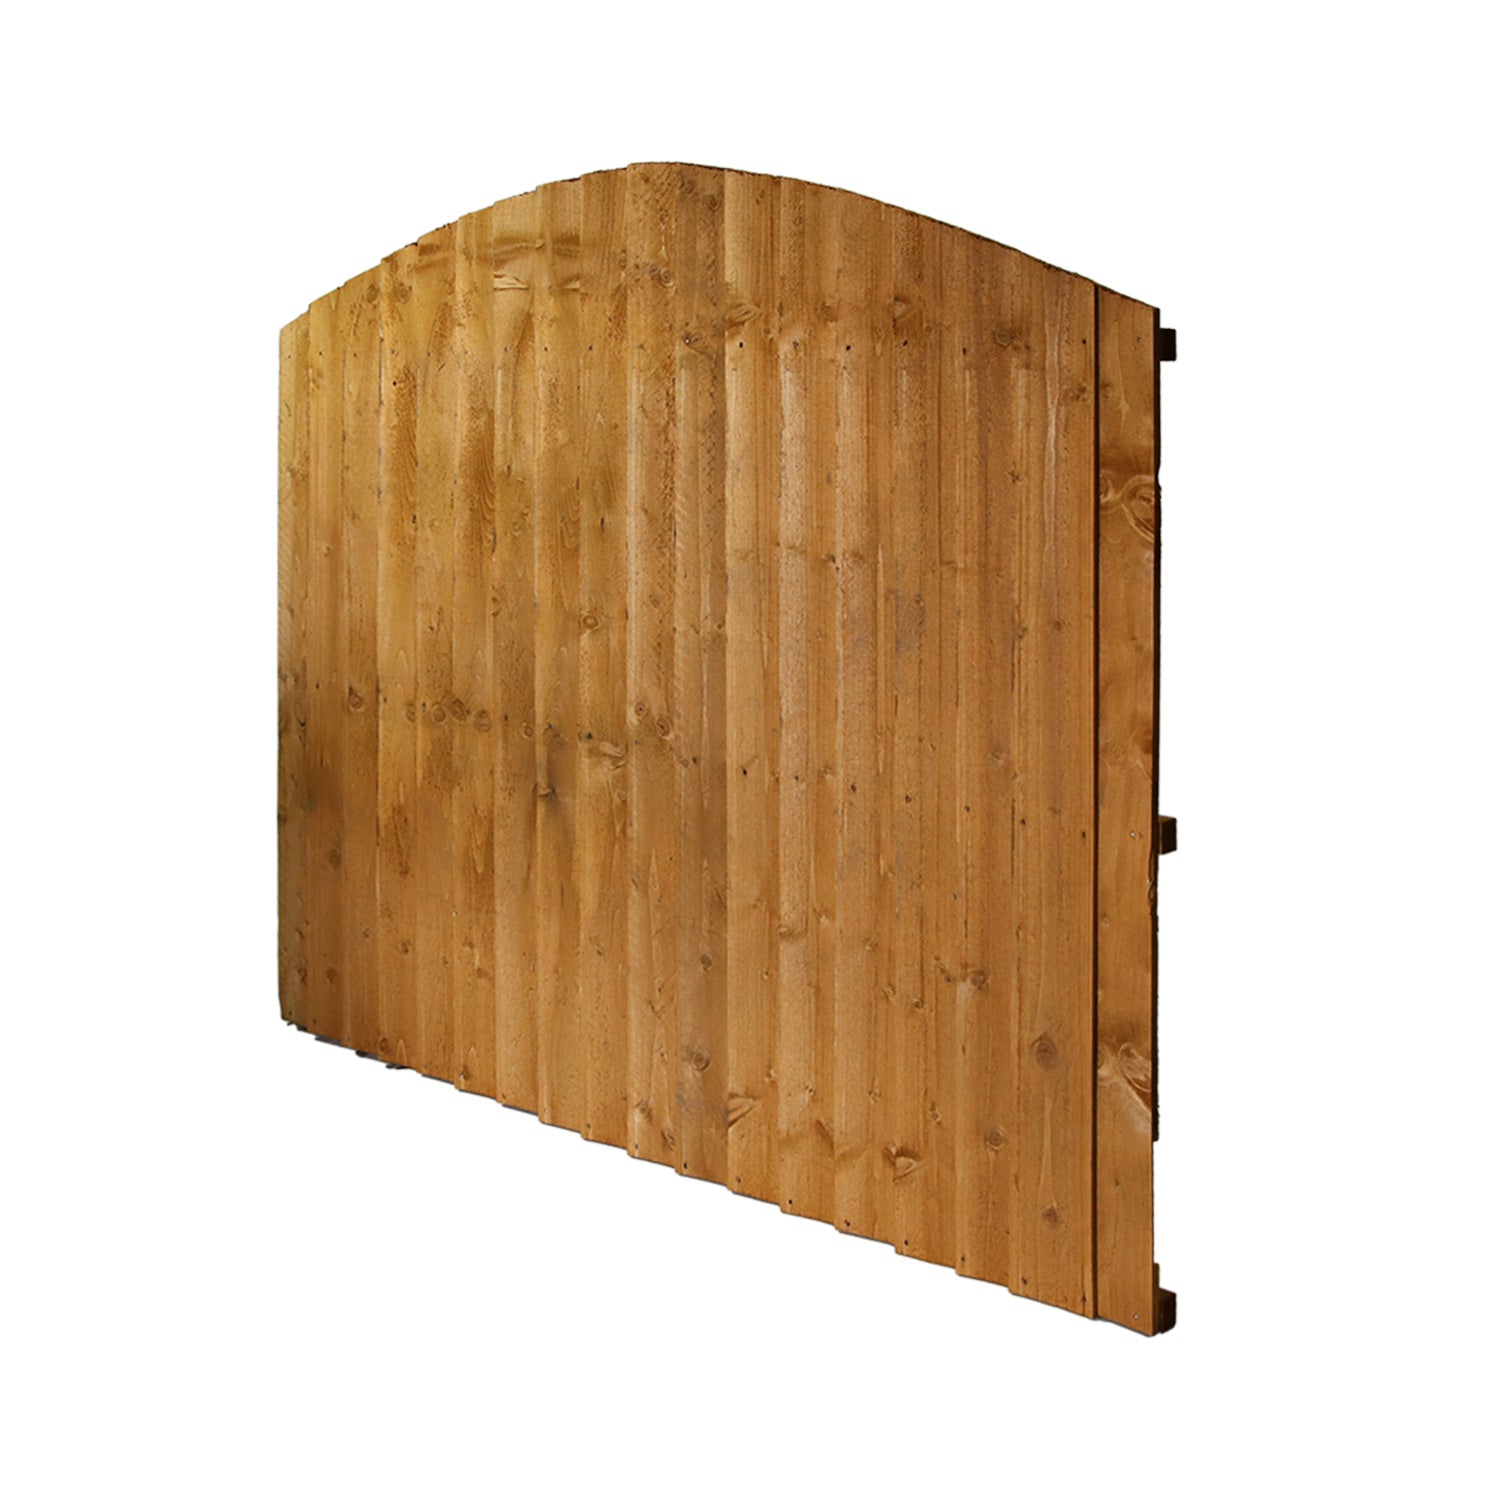 6' x 4' + Dome Featheredge Fence Panel